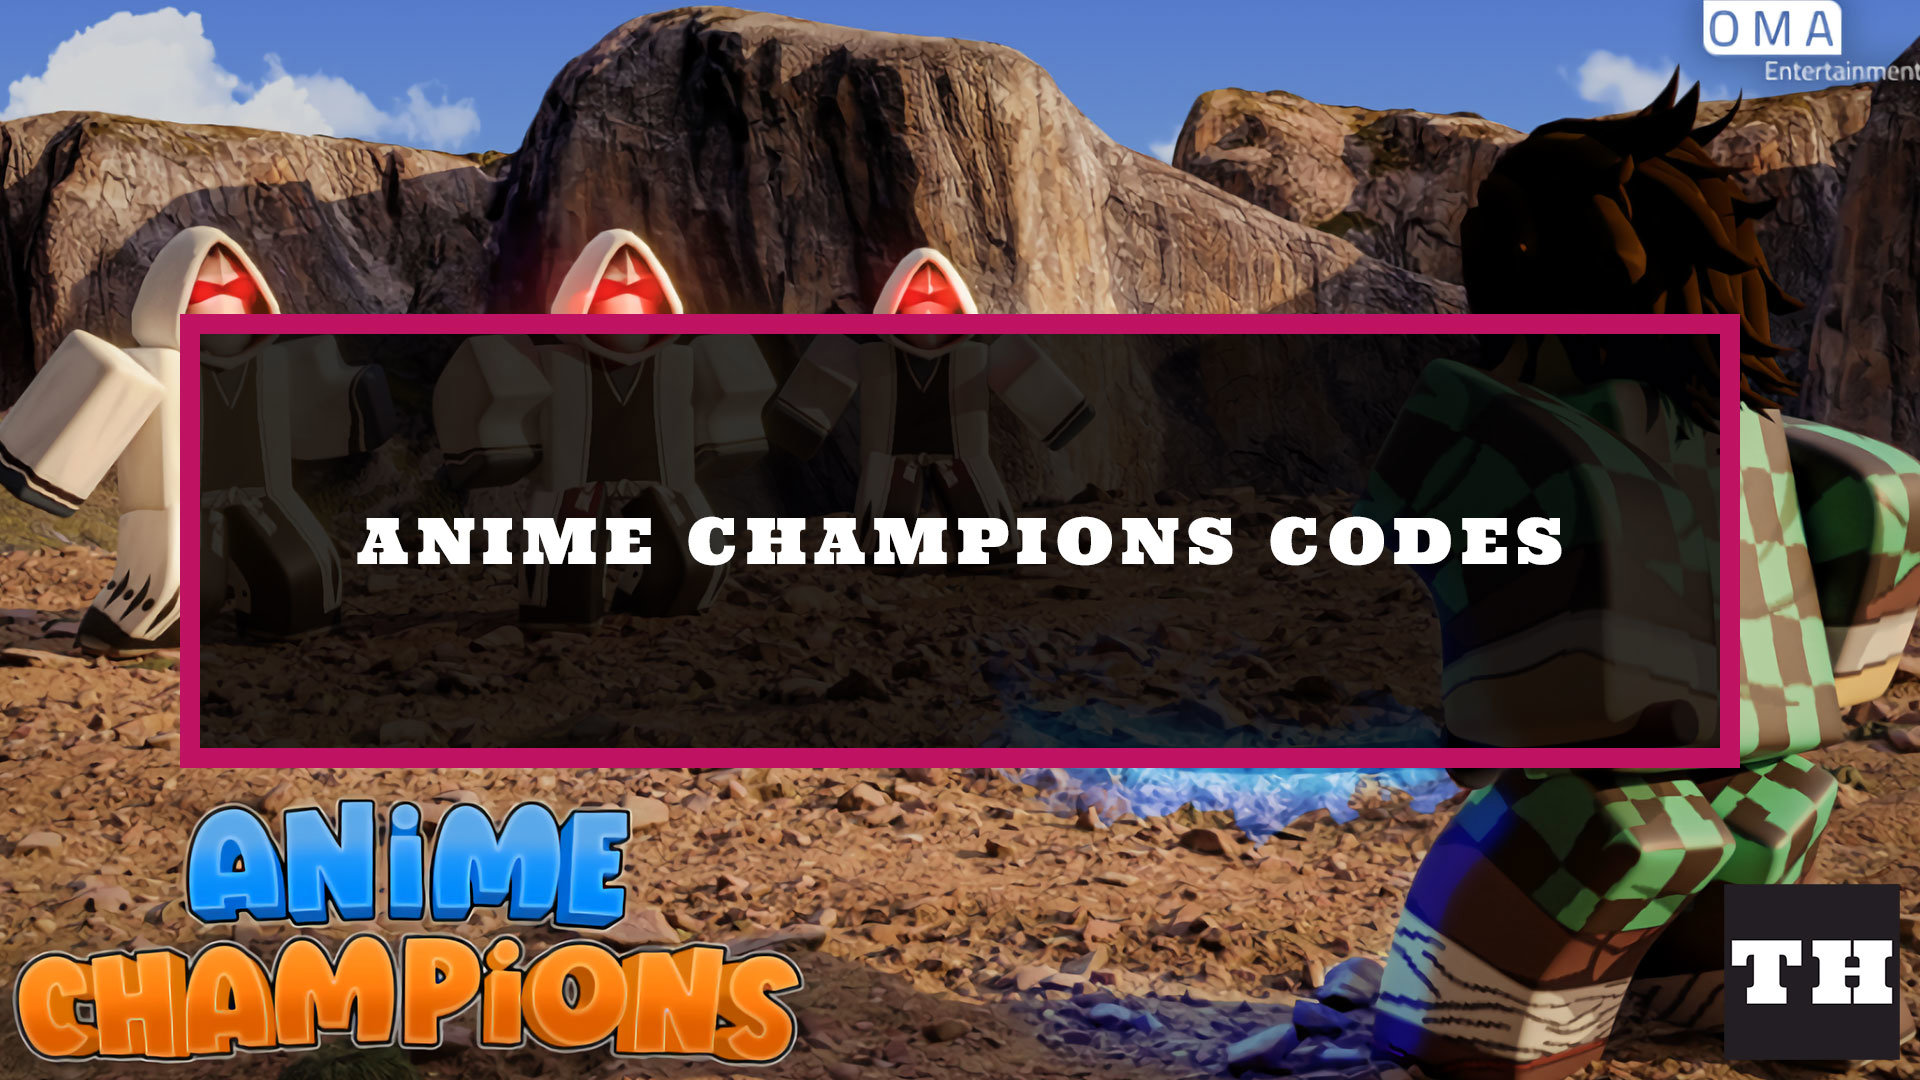 Anime Champions Simulator codes (September 2023) in 2023